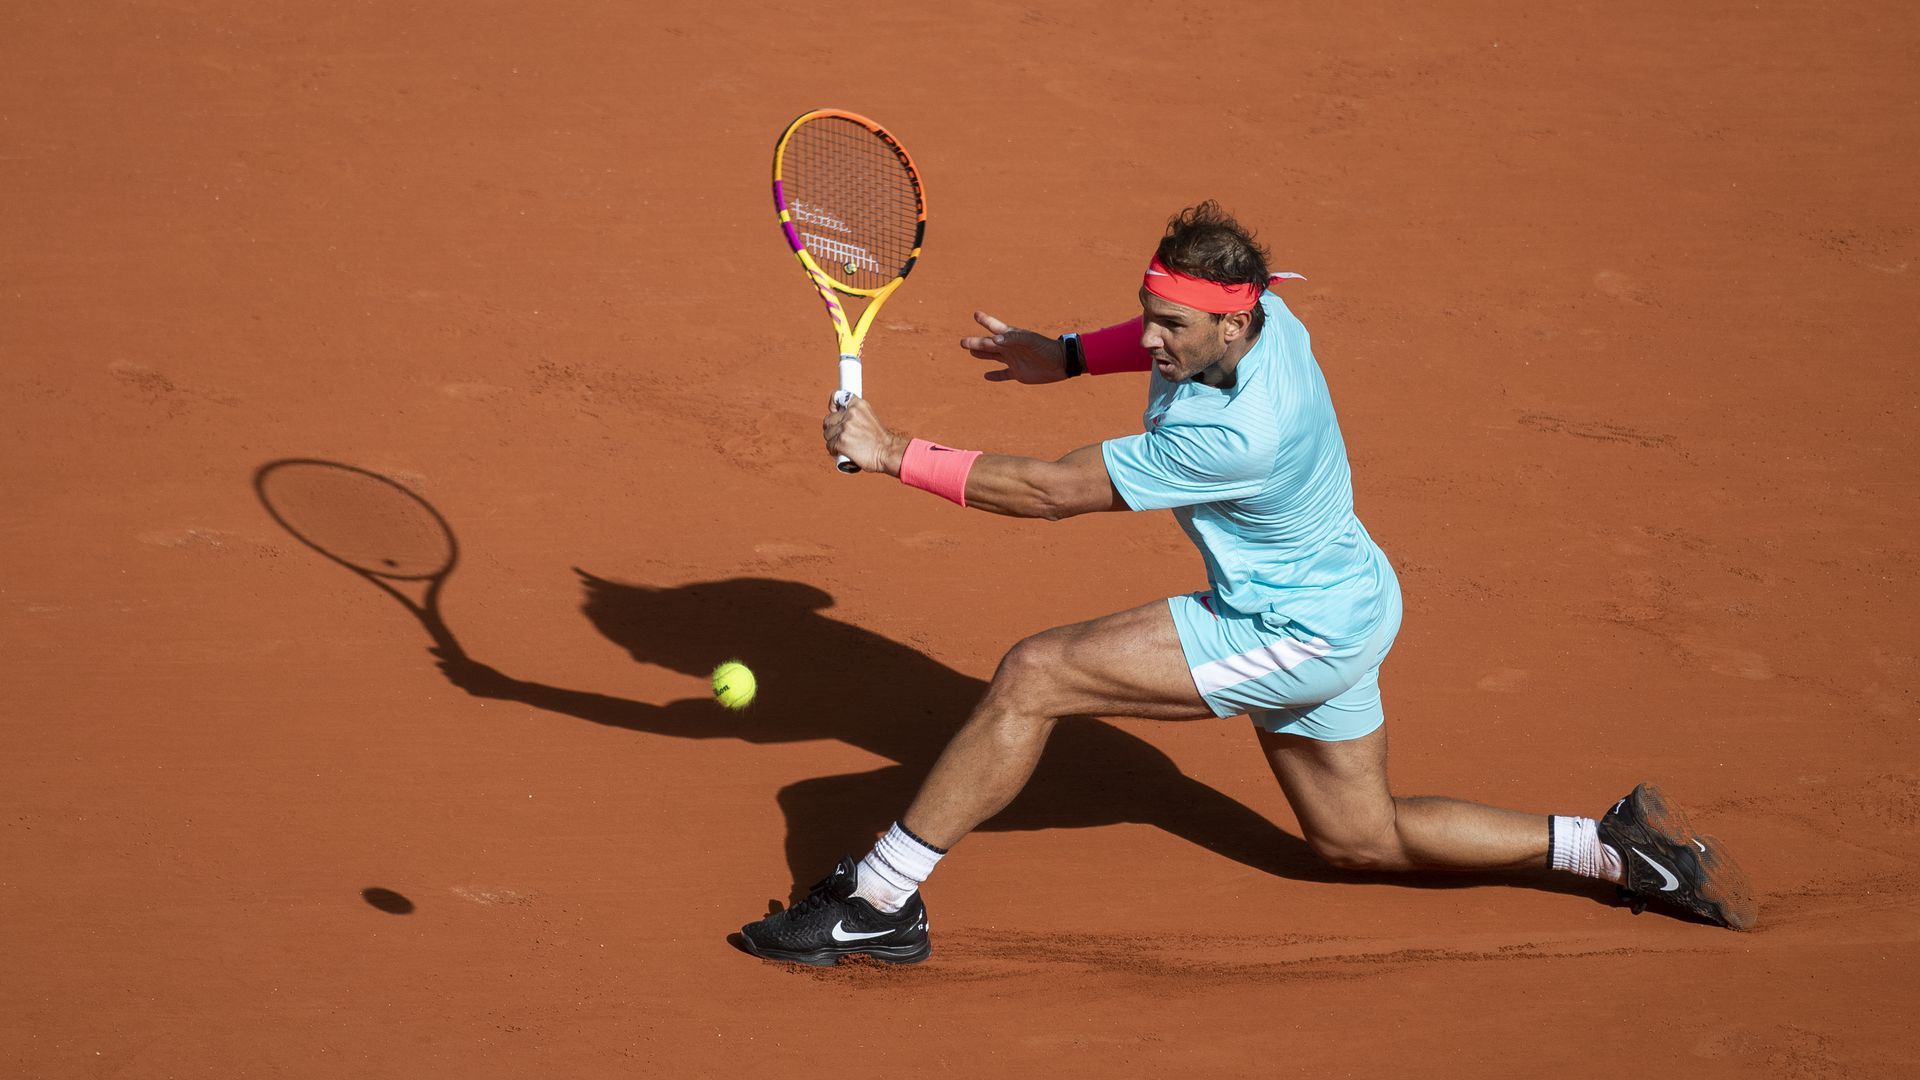 A tennis player at the French Open 